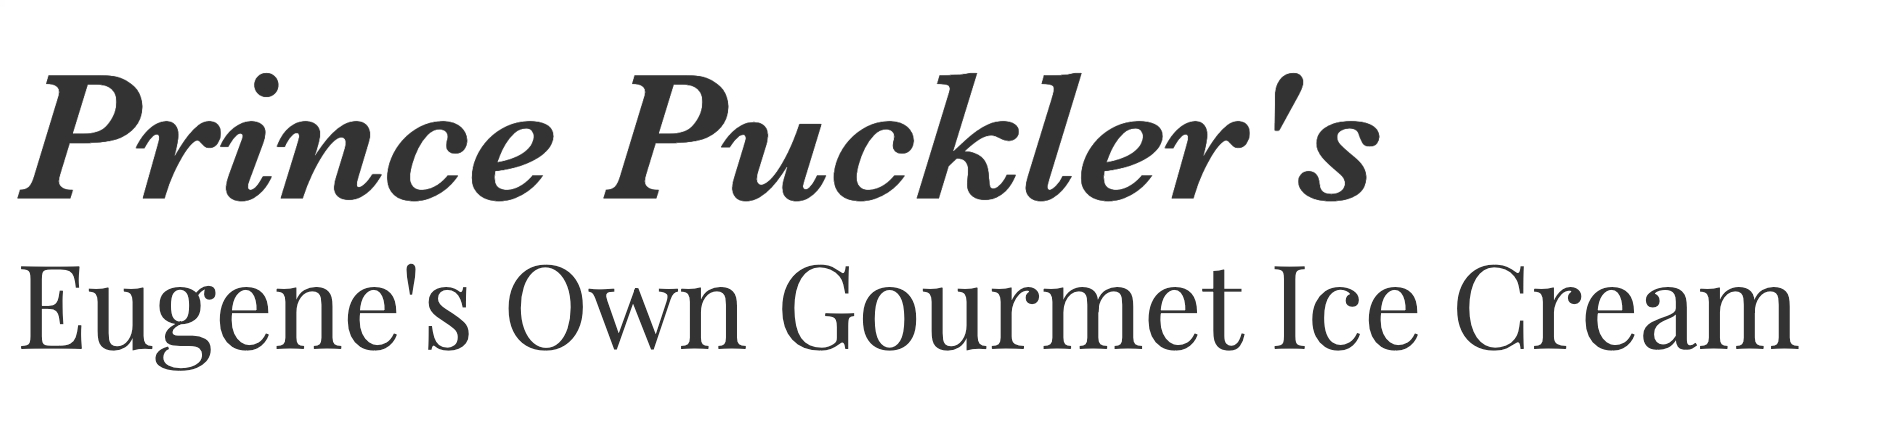 Prince Pucklers Gourmet Ice Cream Locations